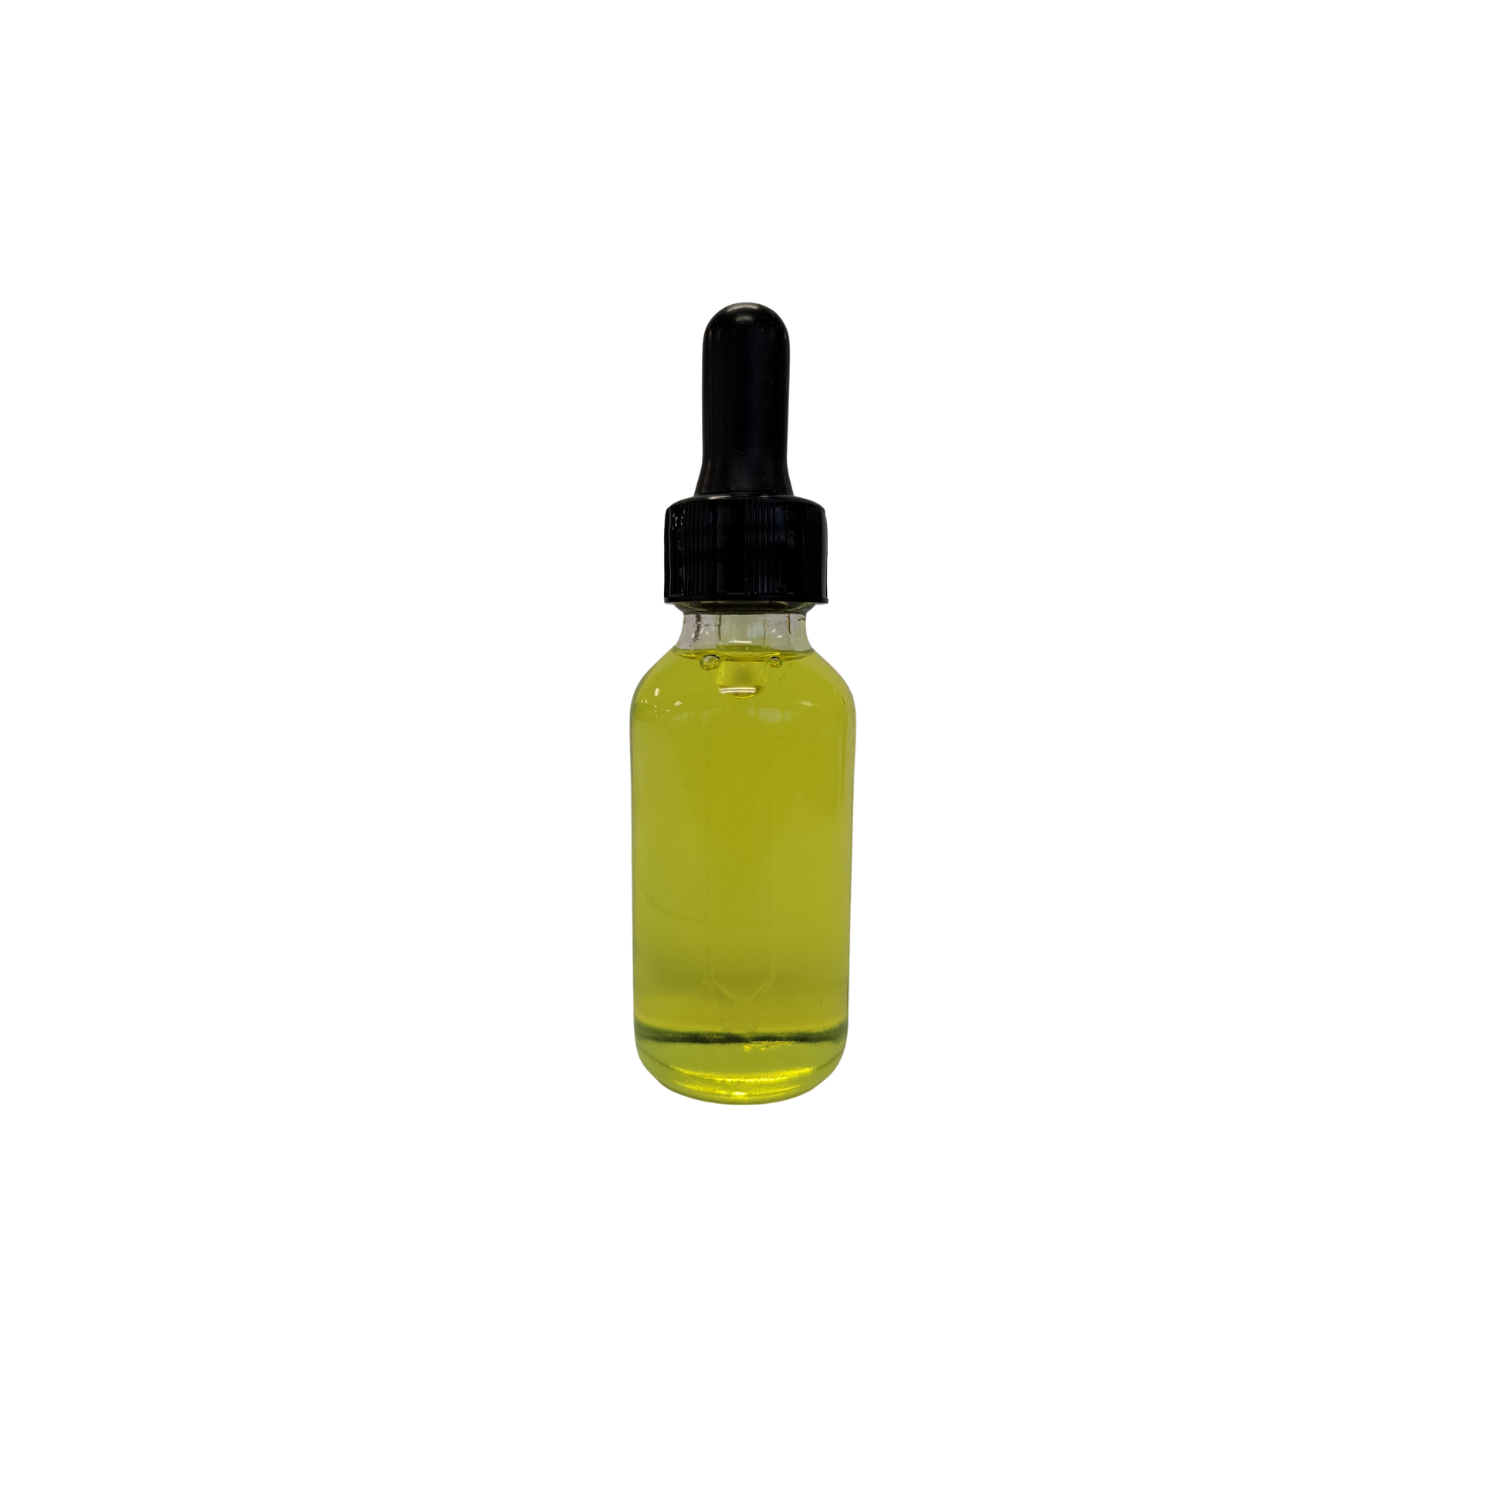 Pre-Packaged, Wholesale Turmeric Brightening Face Oil is a great natural skincare product for achieving a bright and glowing complexion.